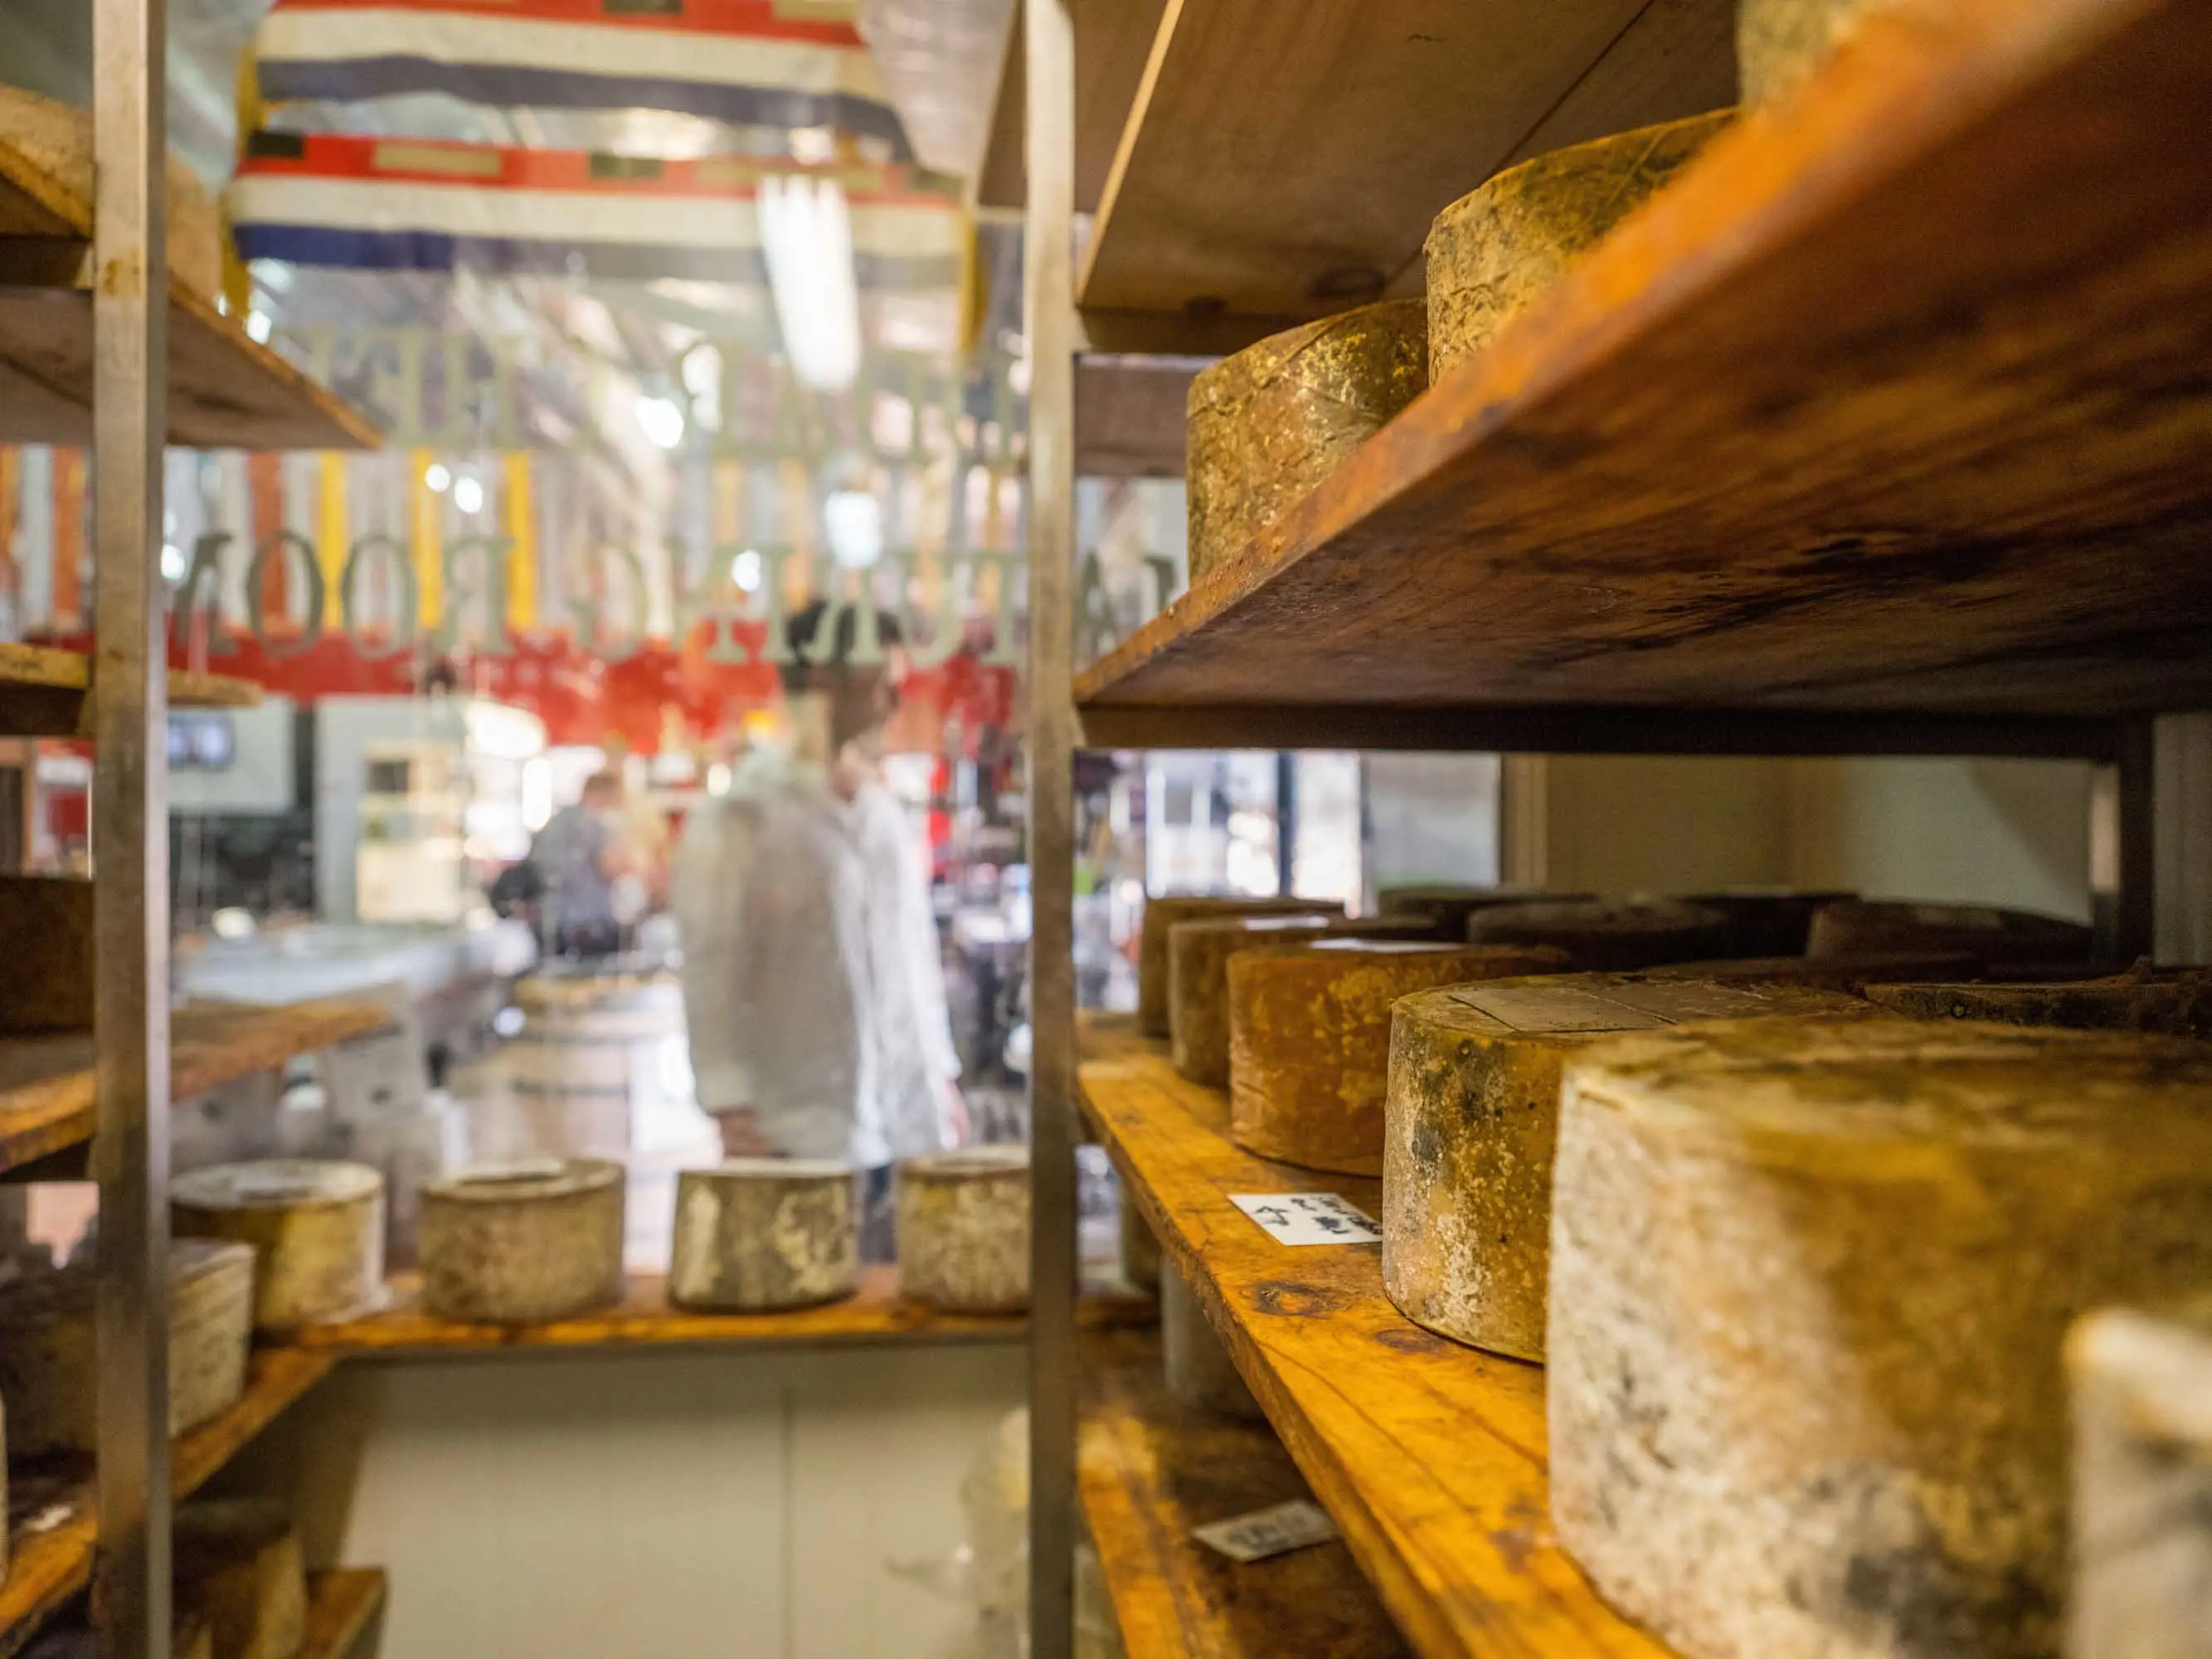 Handmade cheese is placed on wooden shelves in a refrigerated room with a window out onto a factory floor.